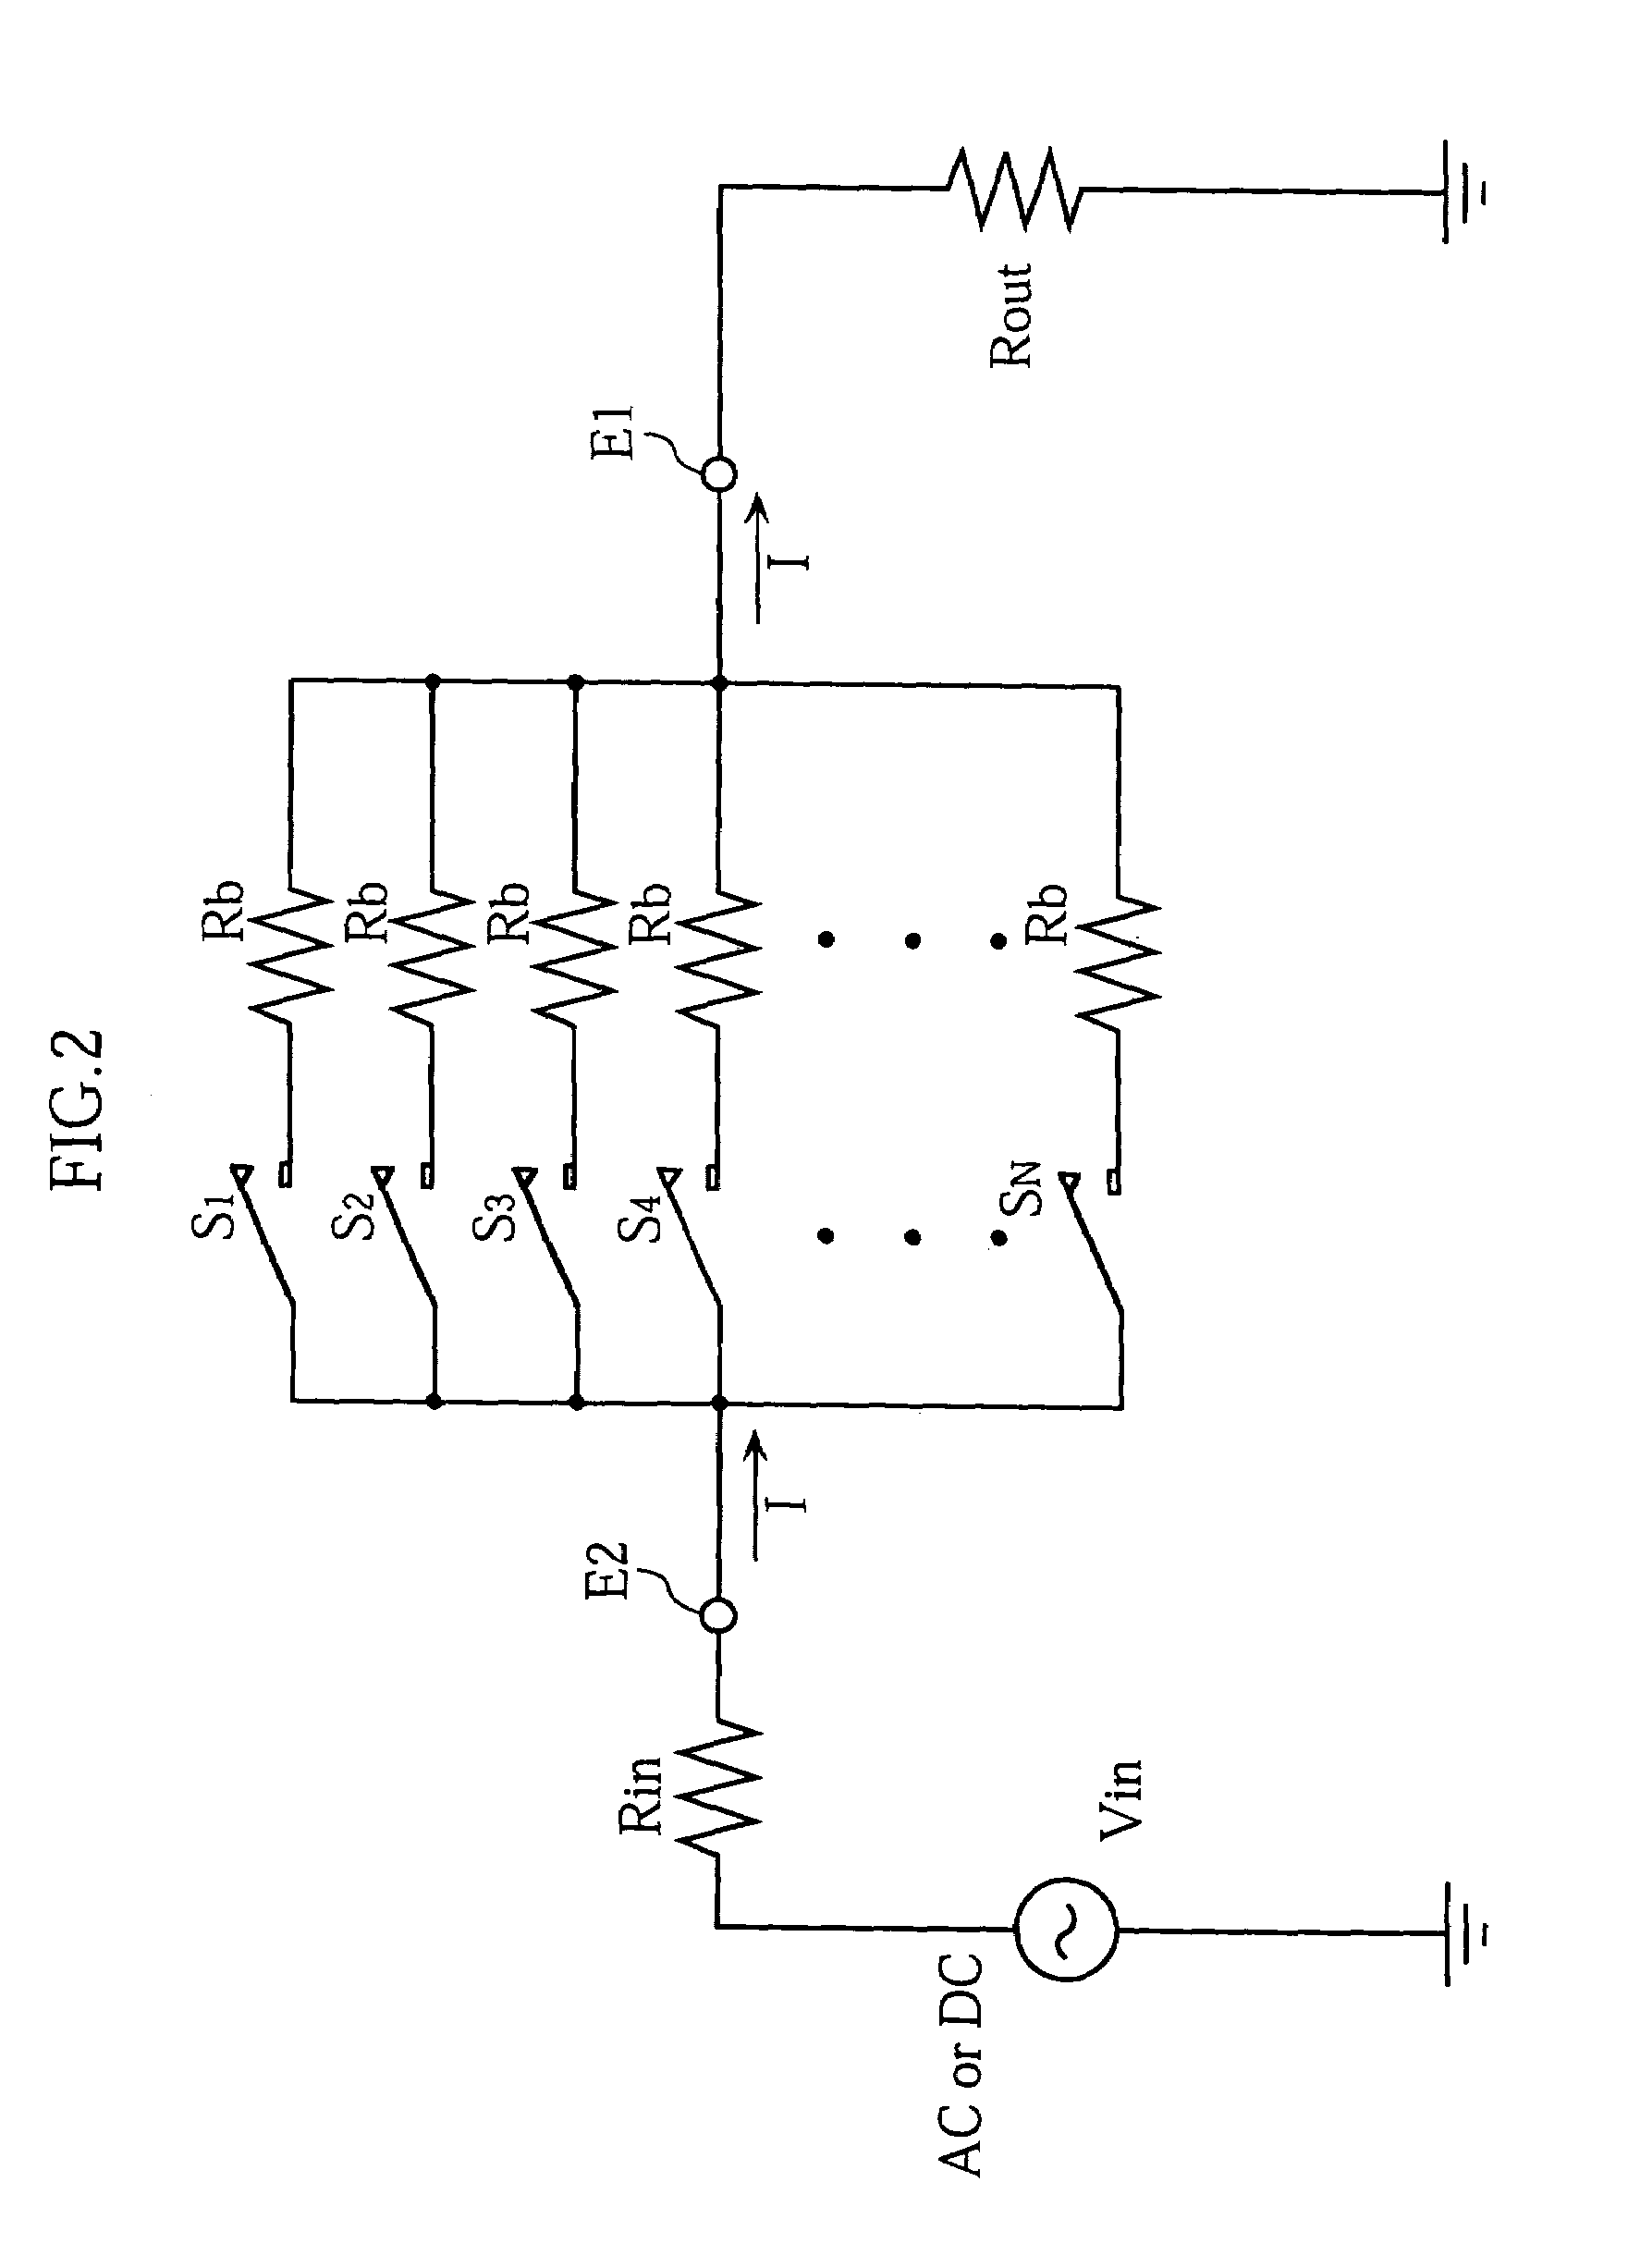 Electrical contacting device and method of making the same